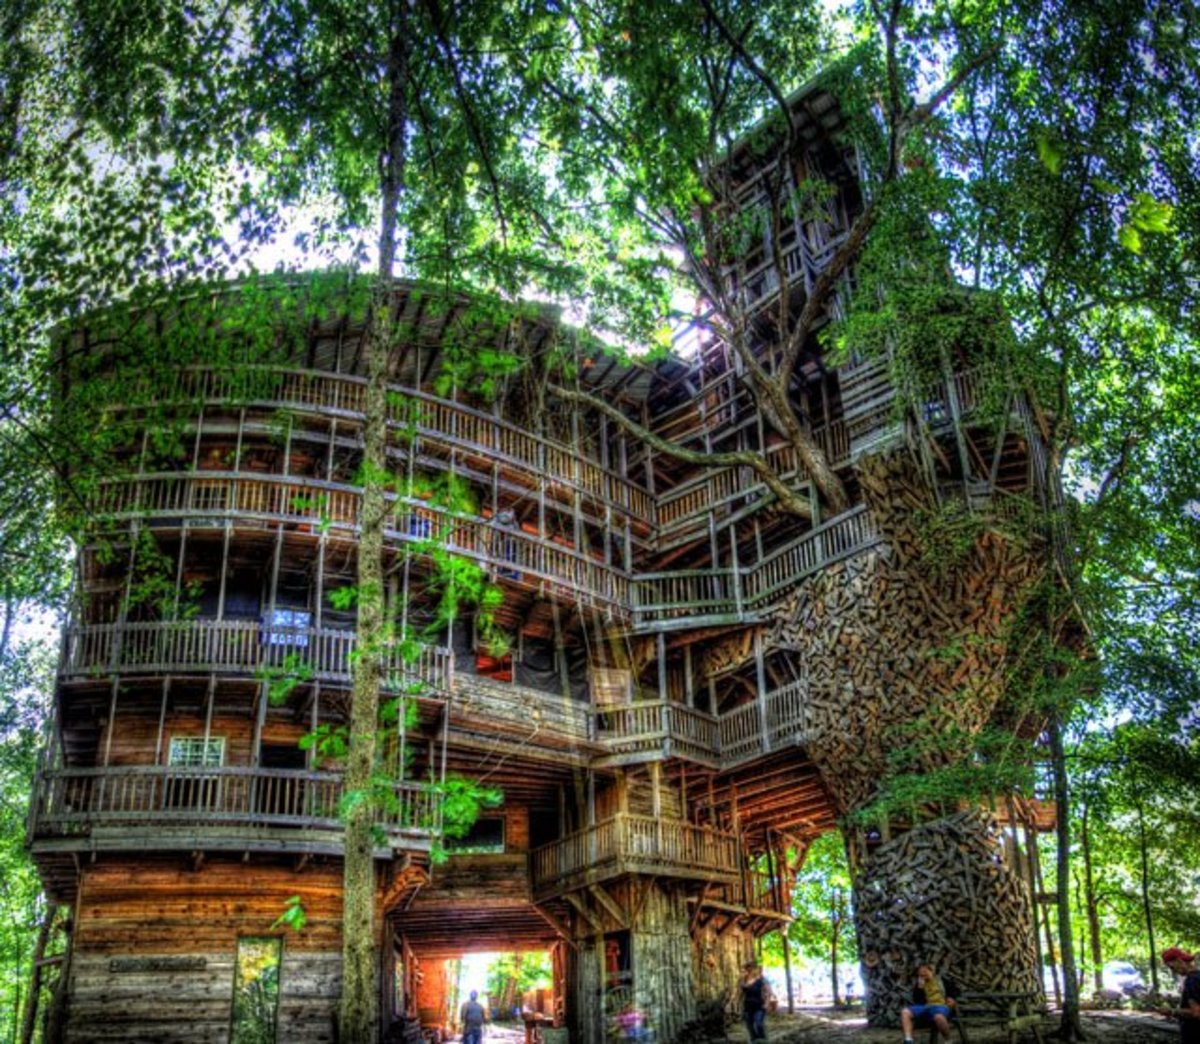 The Minister's Treehouse in Crossville, Tennessee